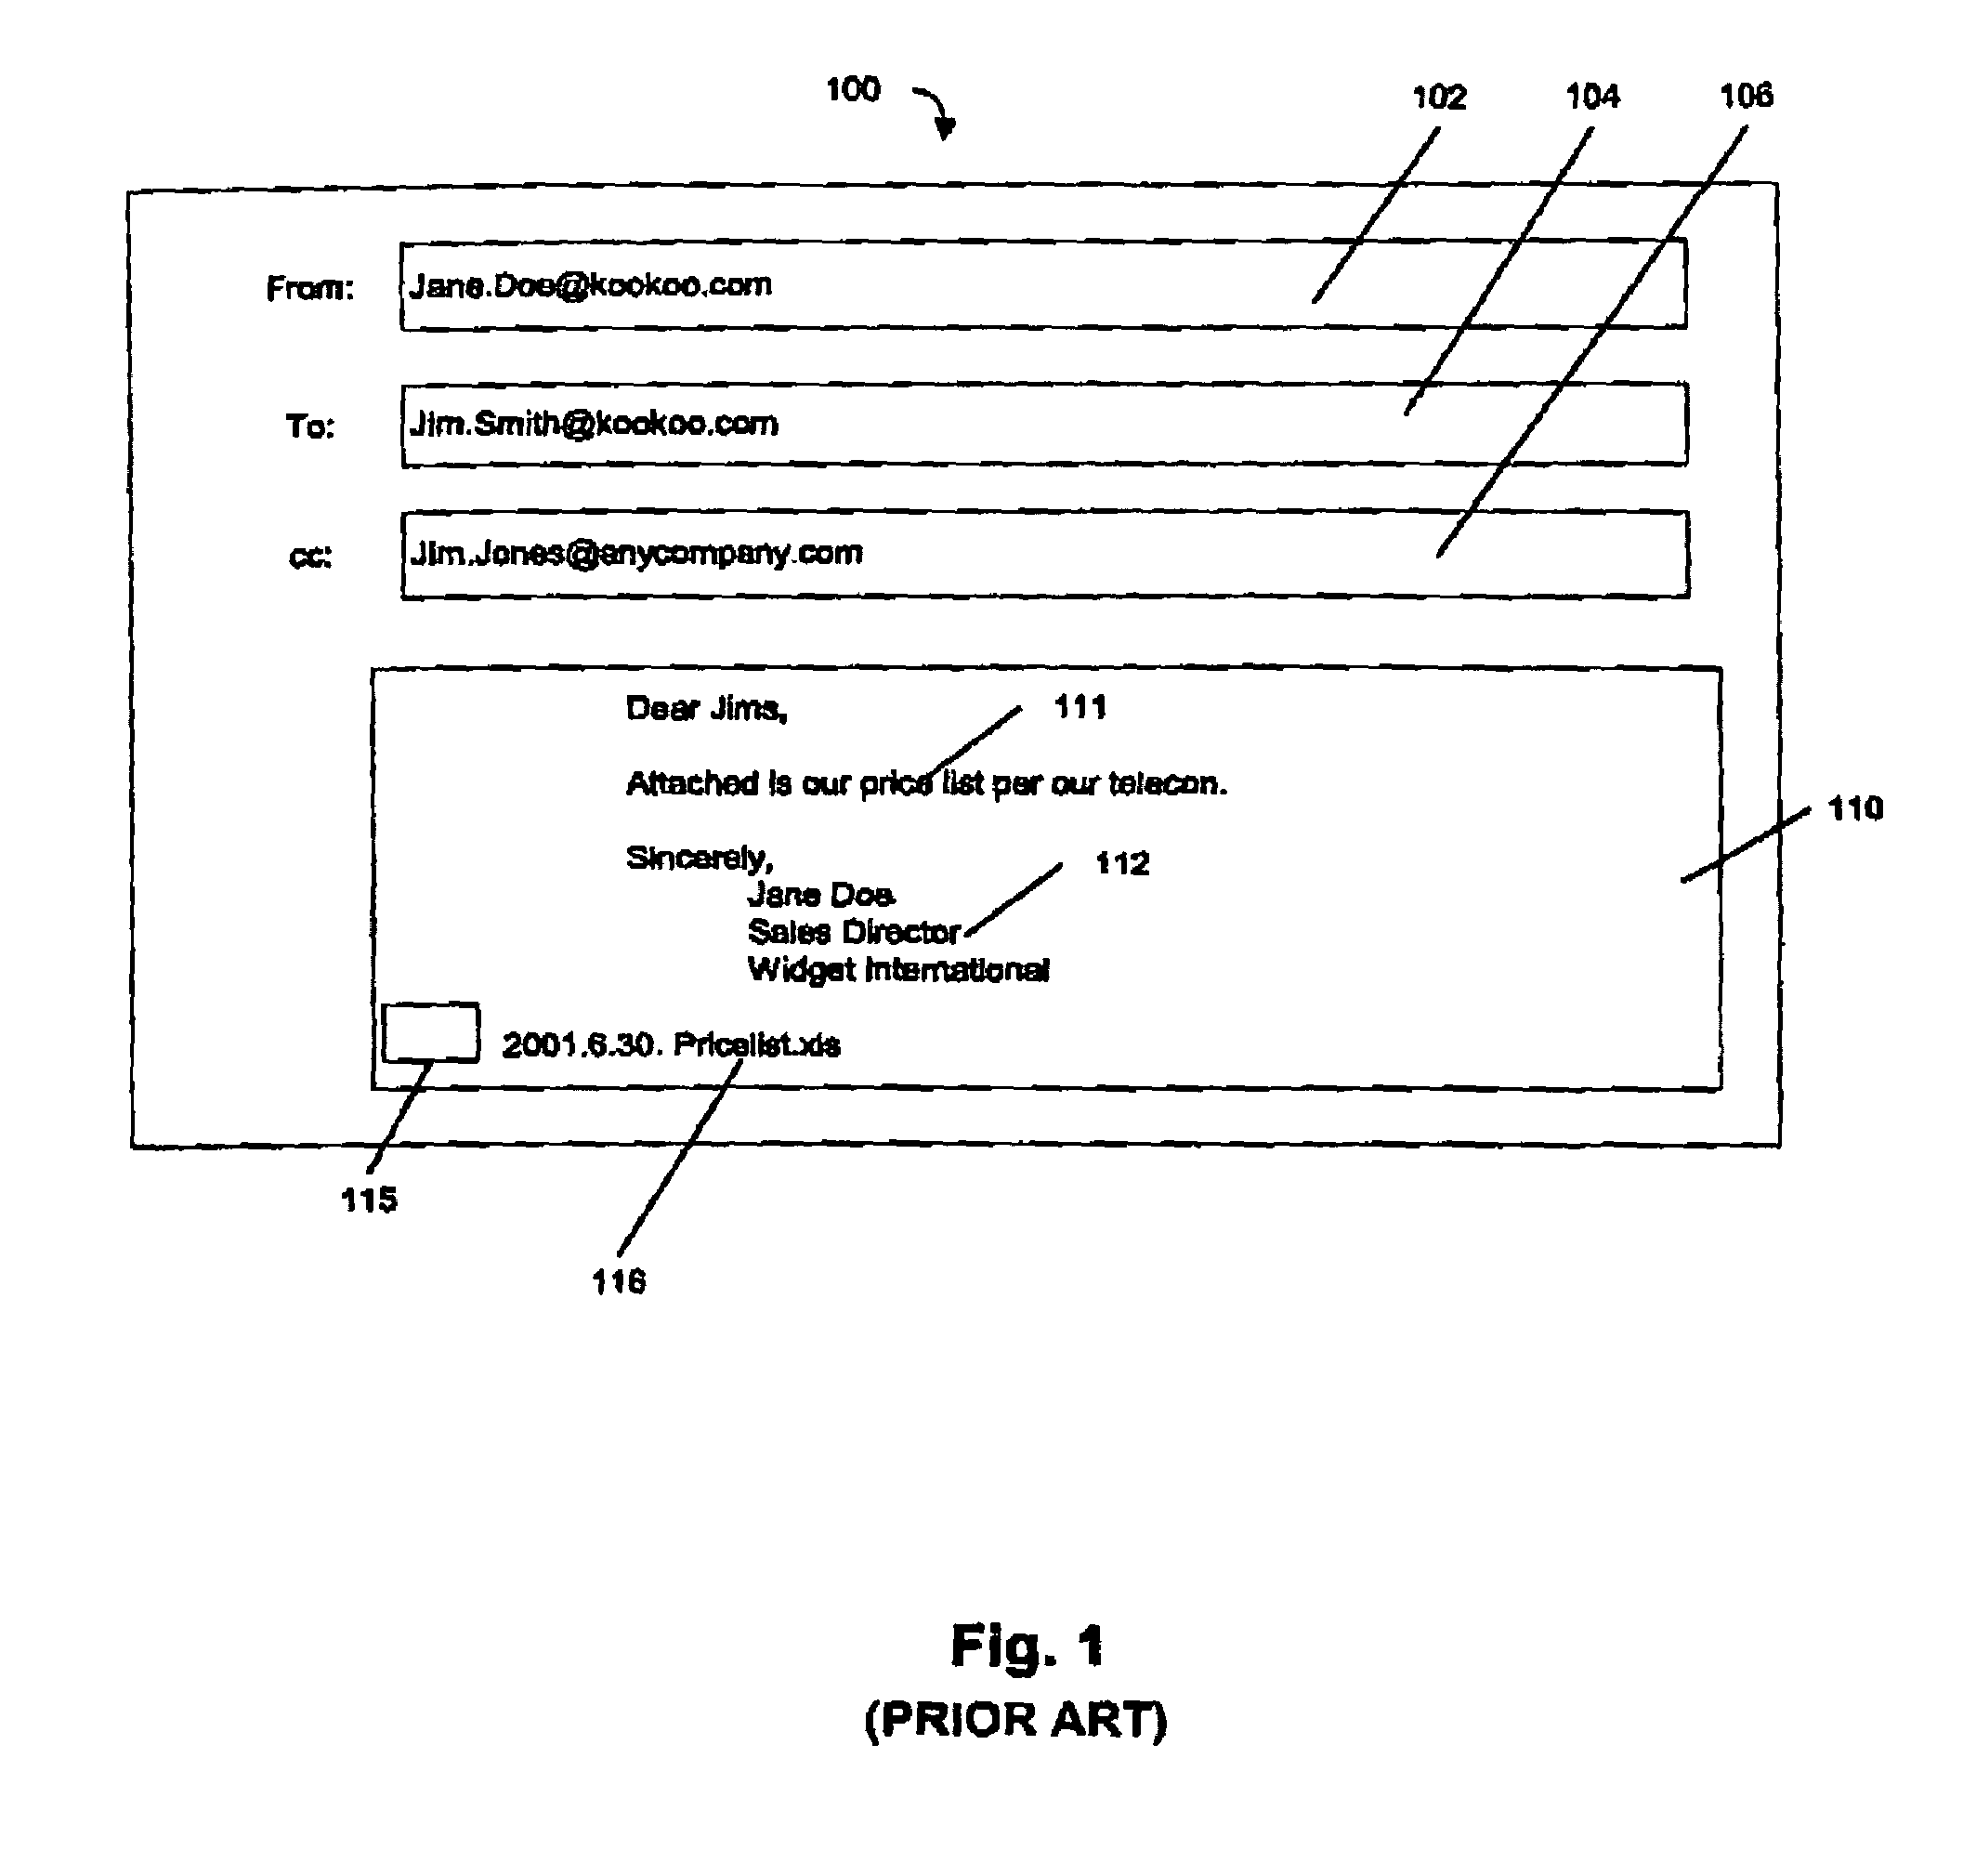 System and method of distributing a file by email